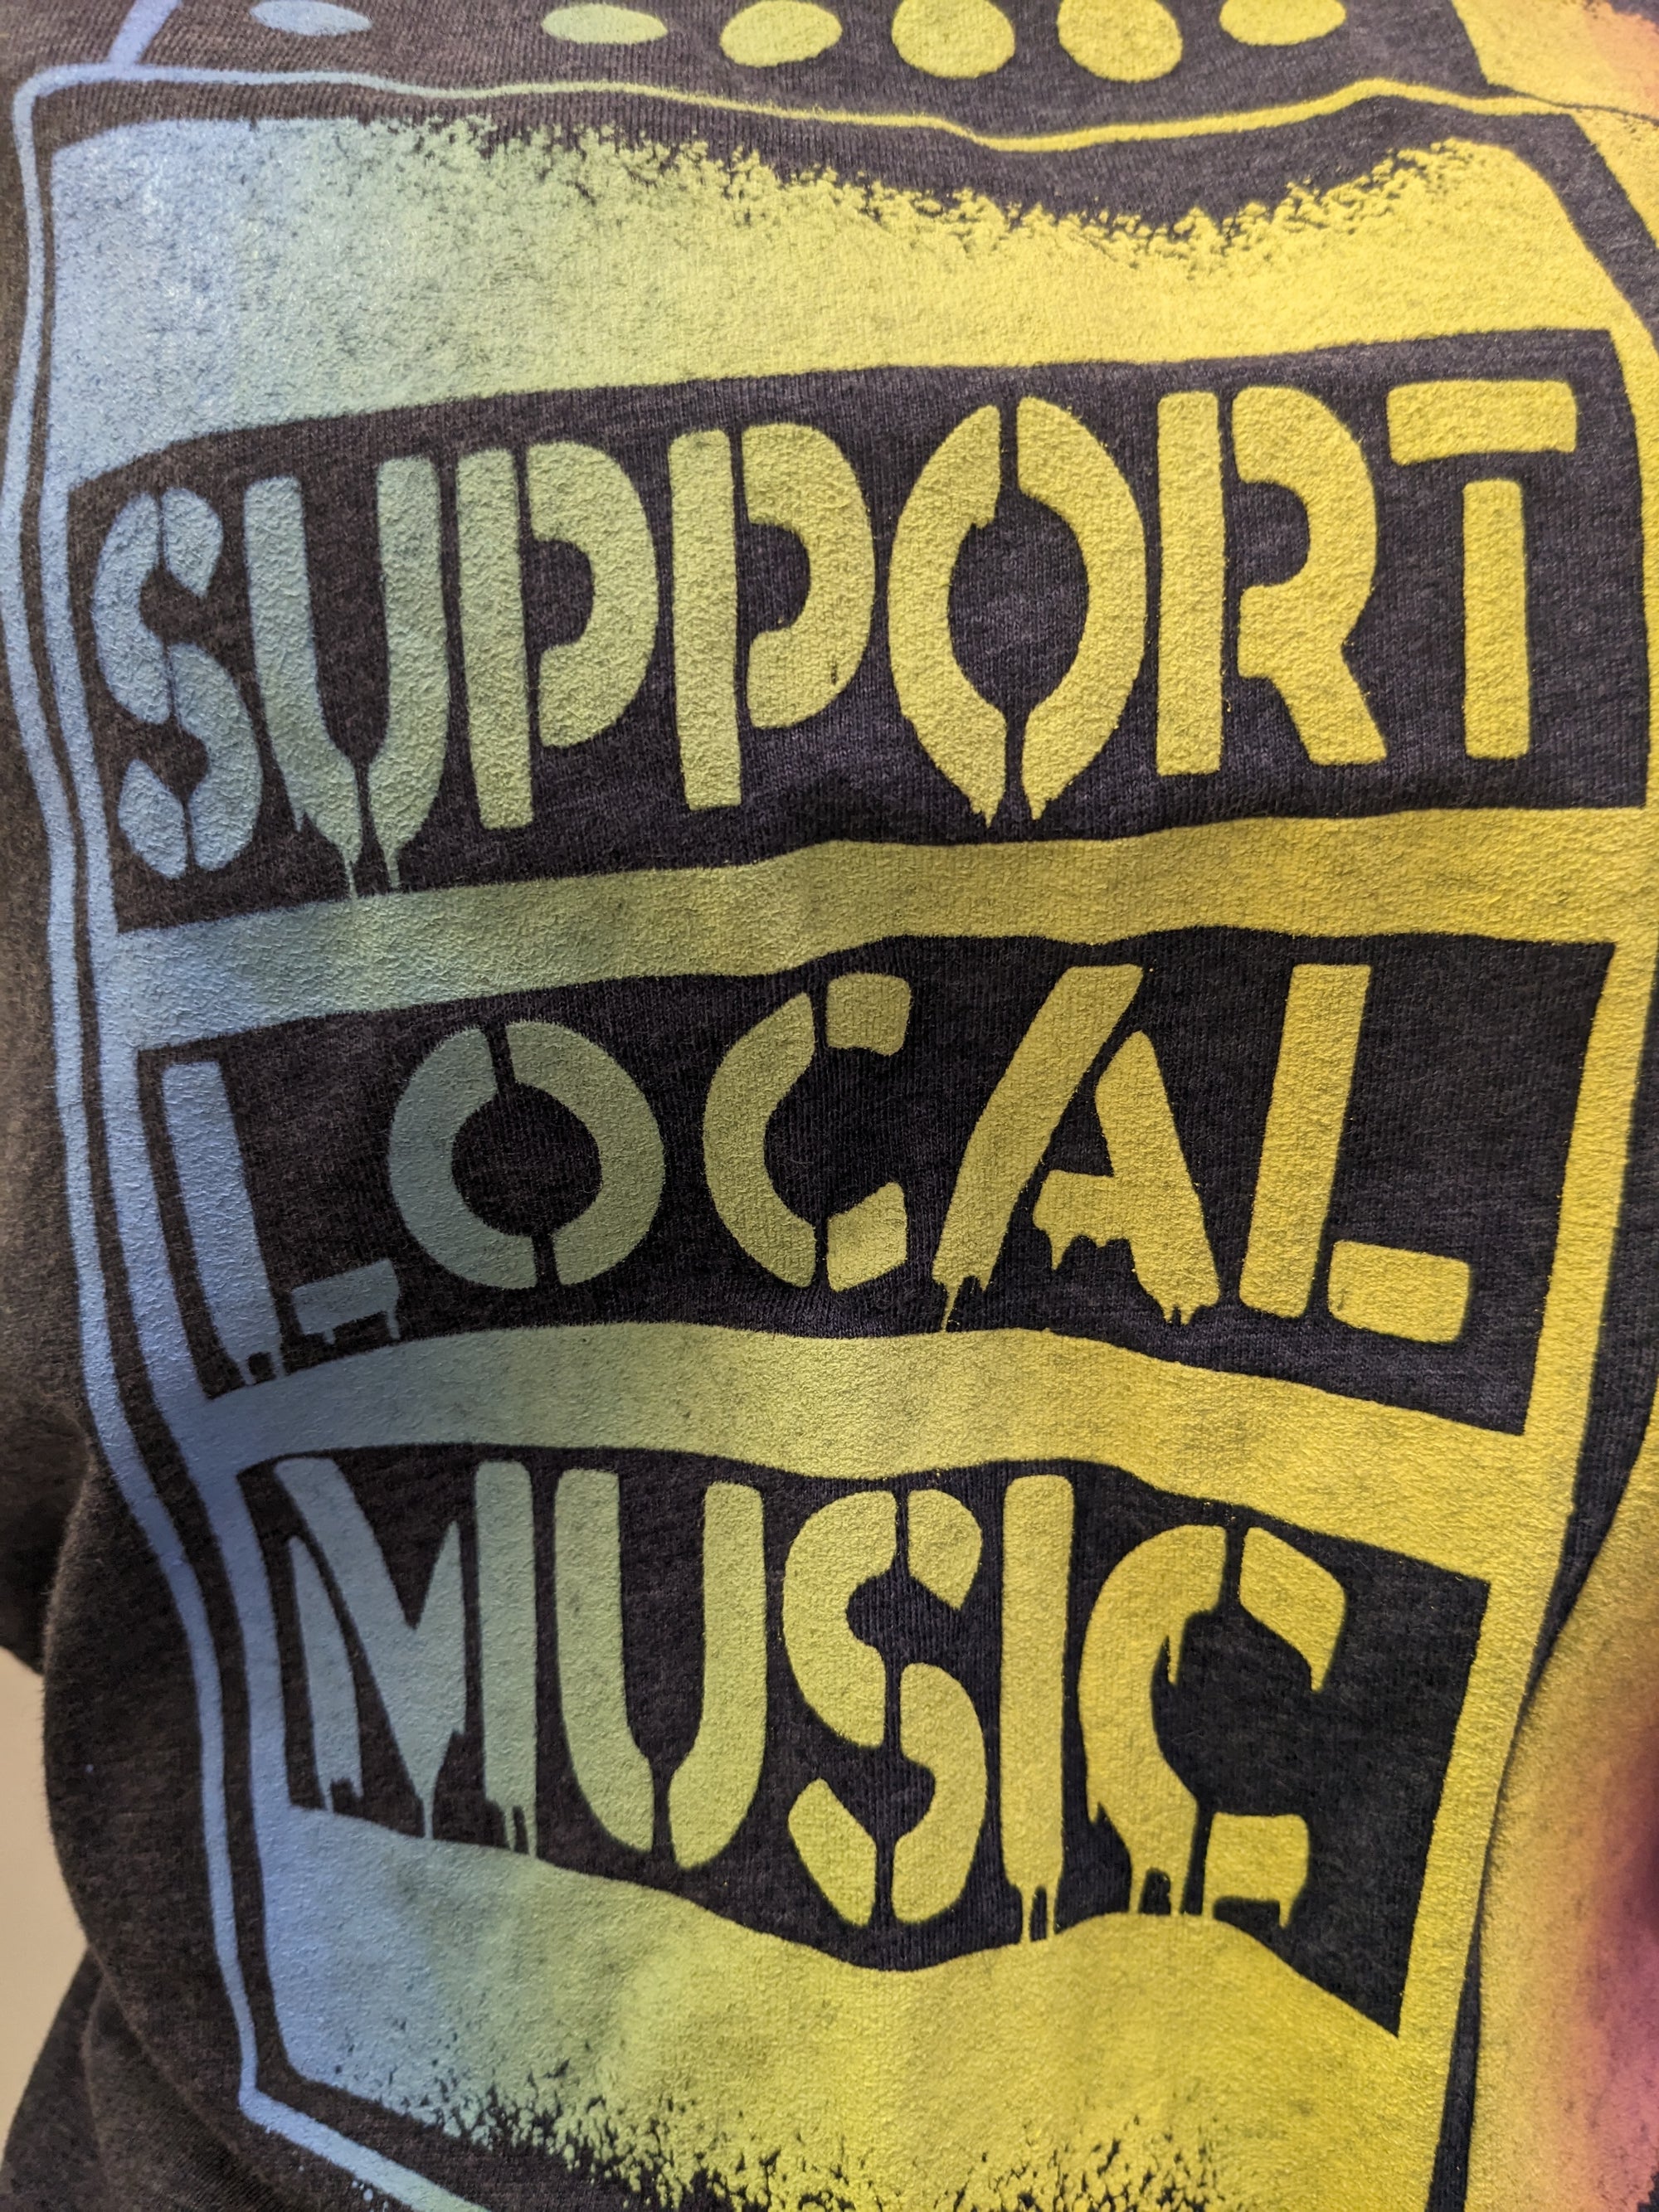 Support Local Music Youth Tee - L